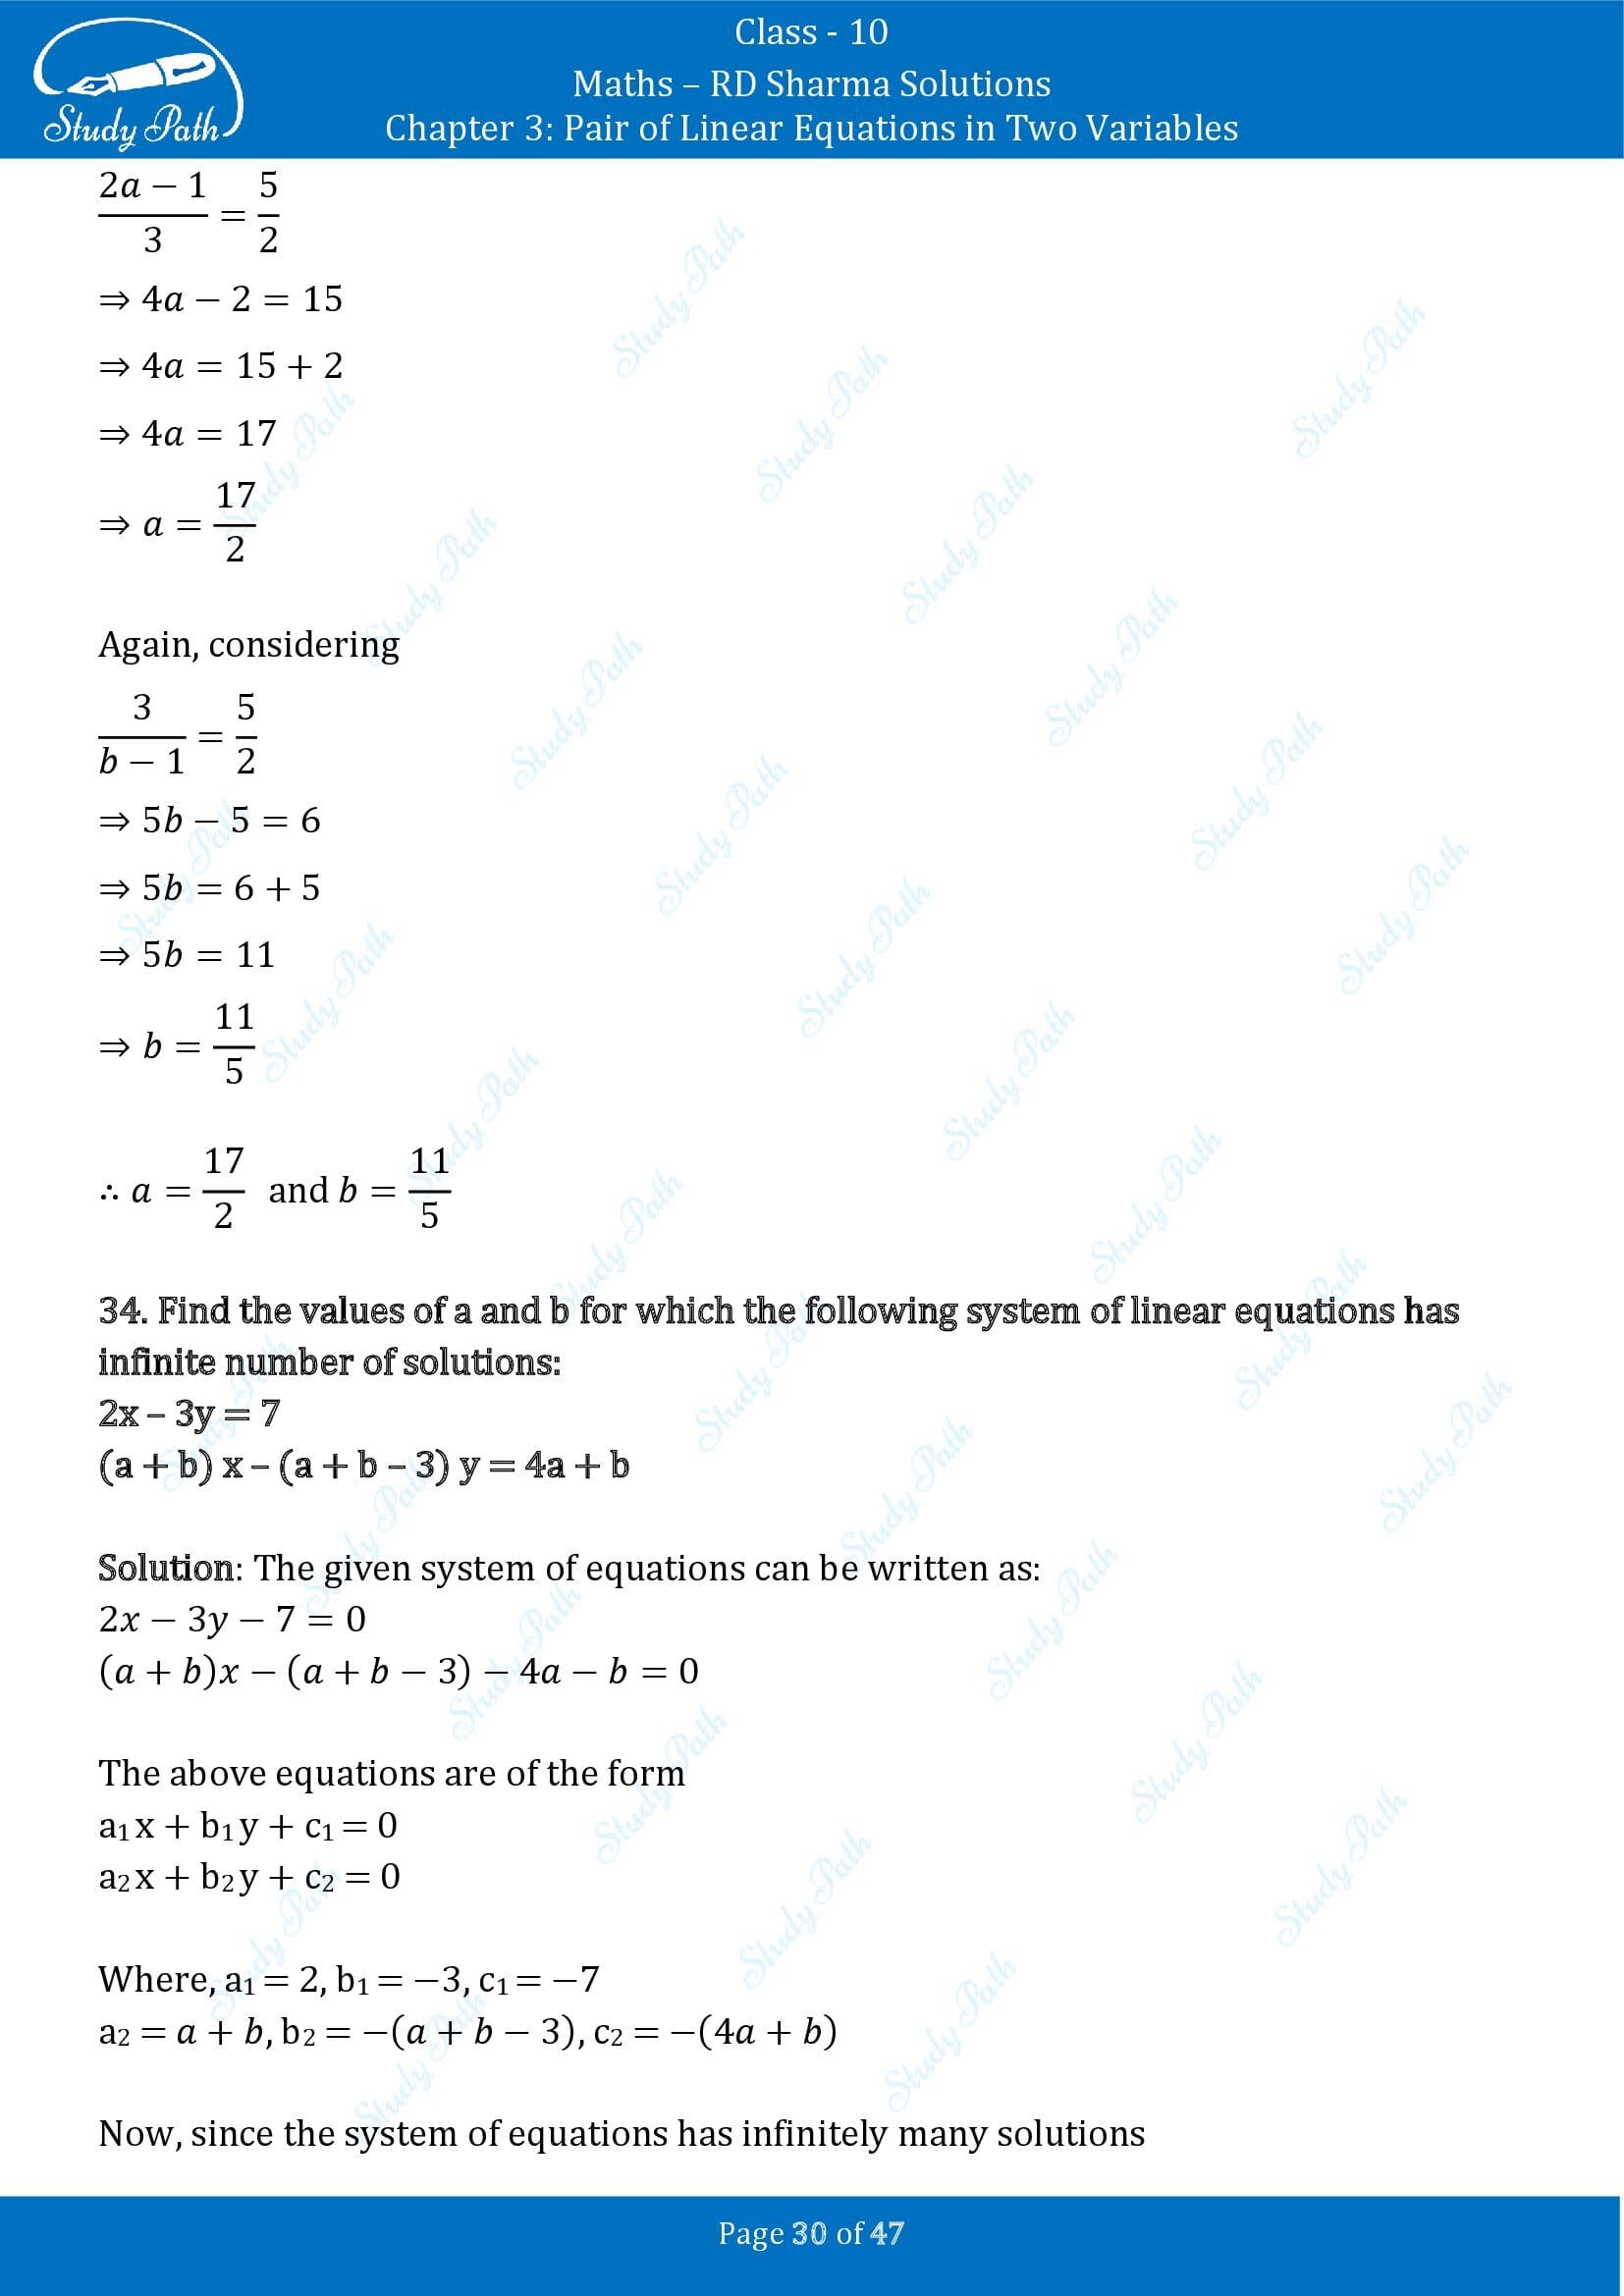 RD Sharma Solutions Class 10 Chapter 3 Pair of Linear Equations in Two Variables Exercise 3.5 00030